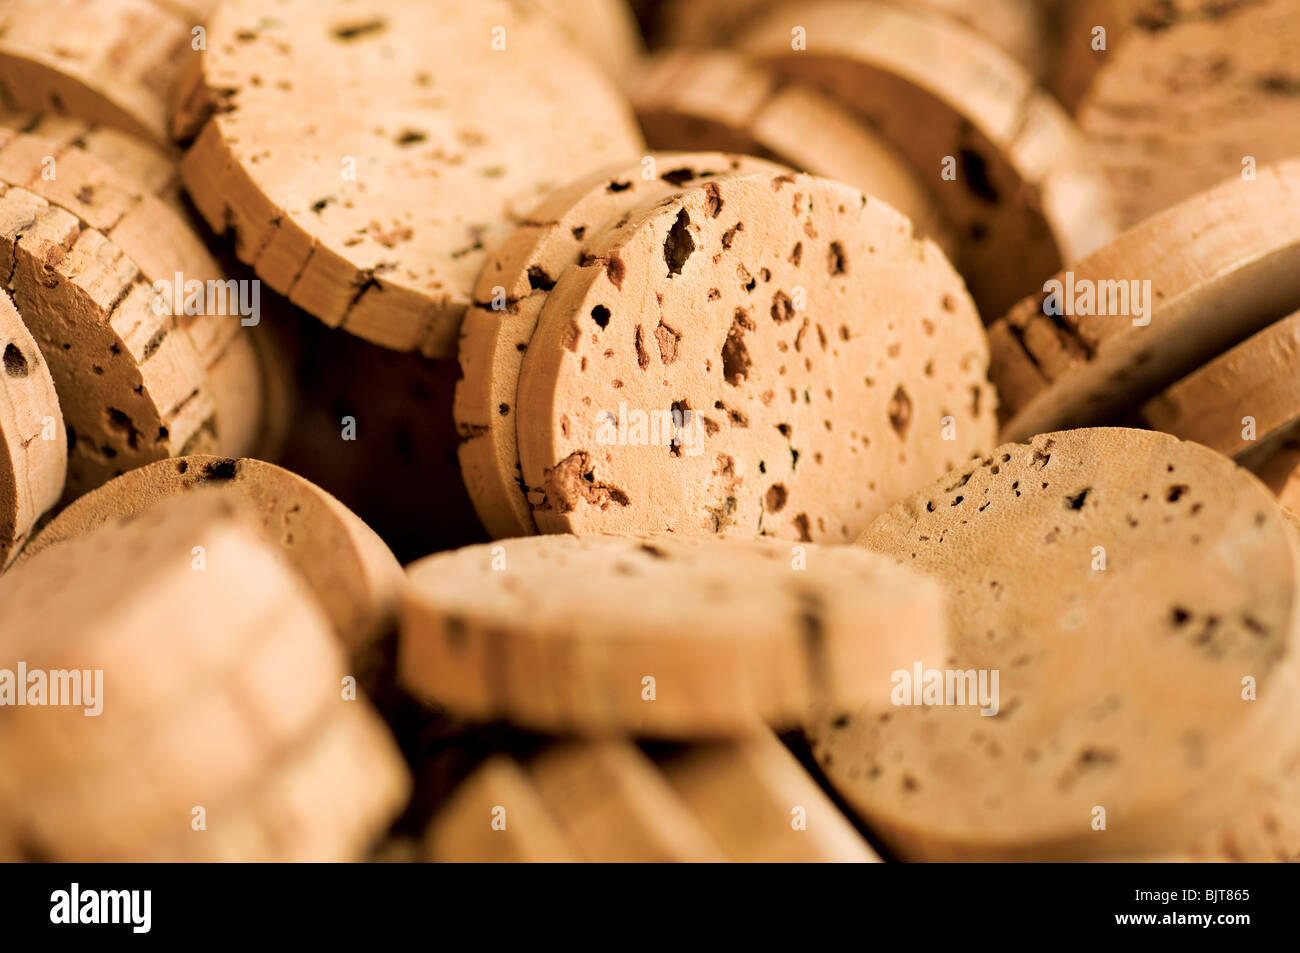 Cork disks close-up. Cork Factory S. Bras Alportel Algarve Portugal. Manual harvest of material for production of champagne wine spirits stoppers Stock Photo